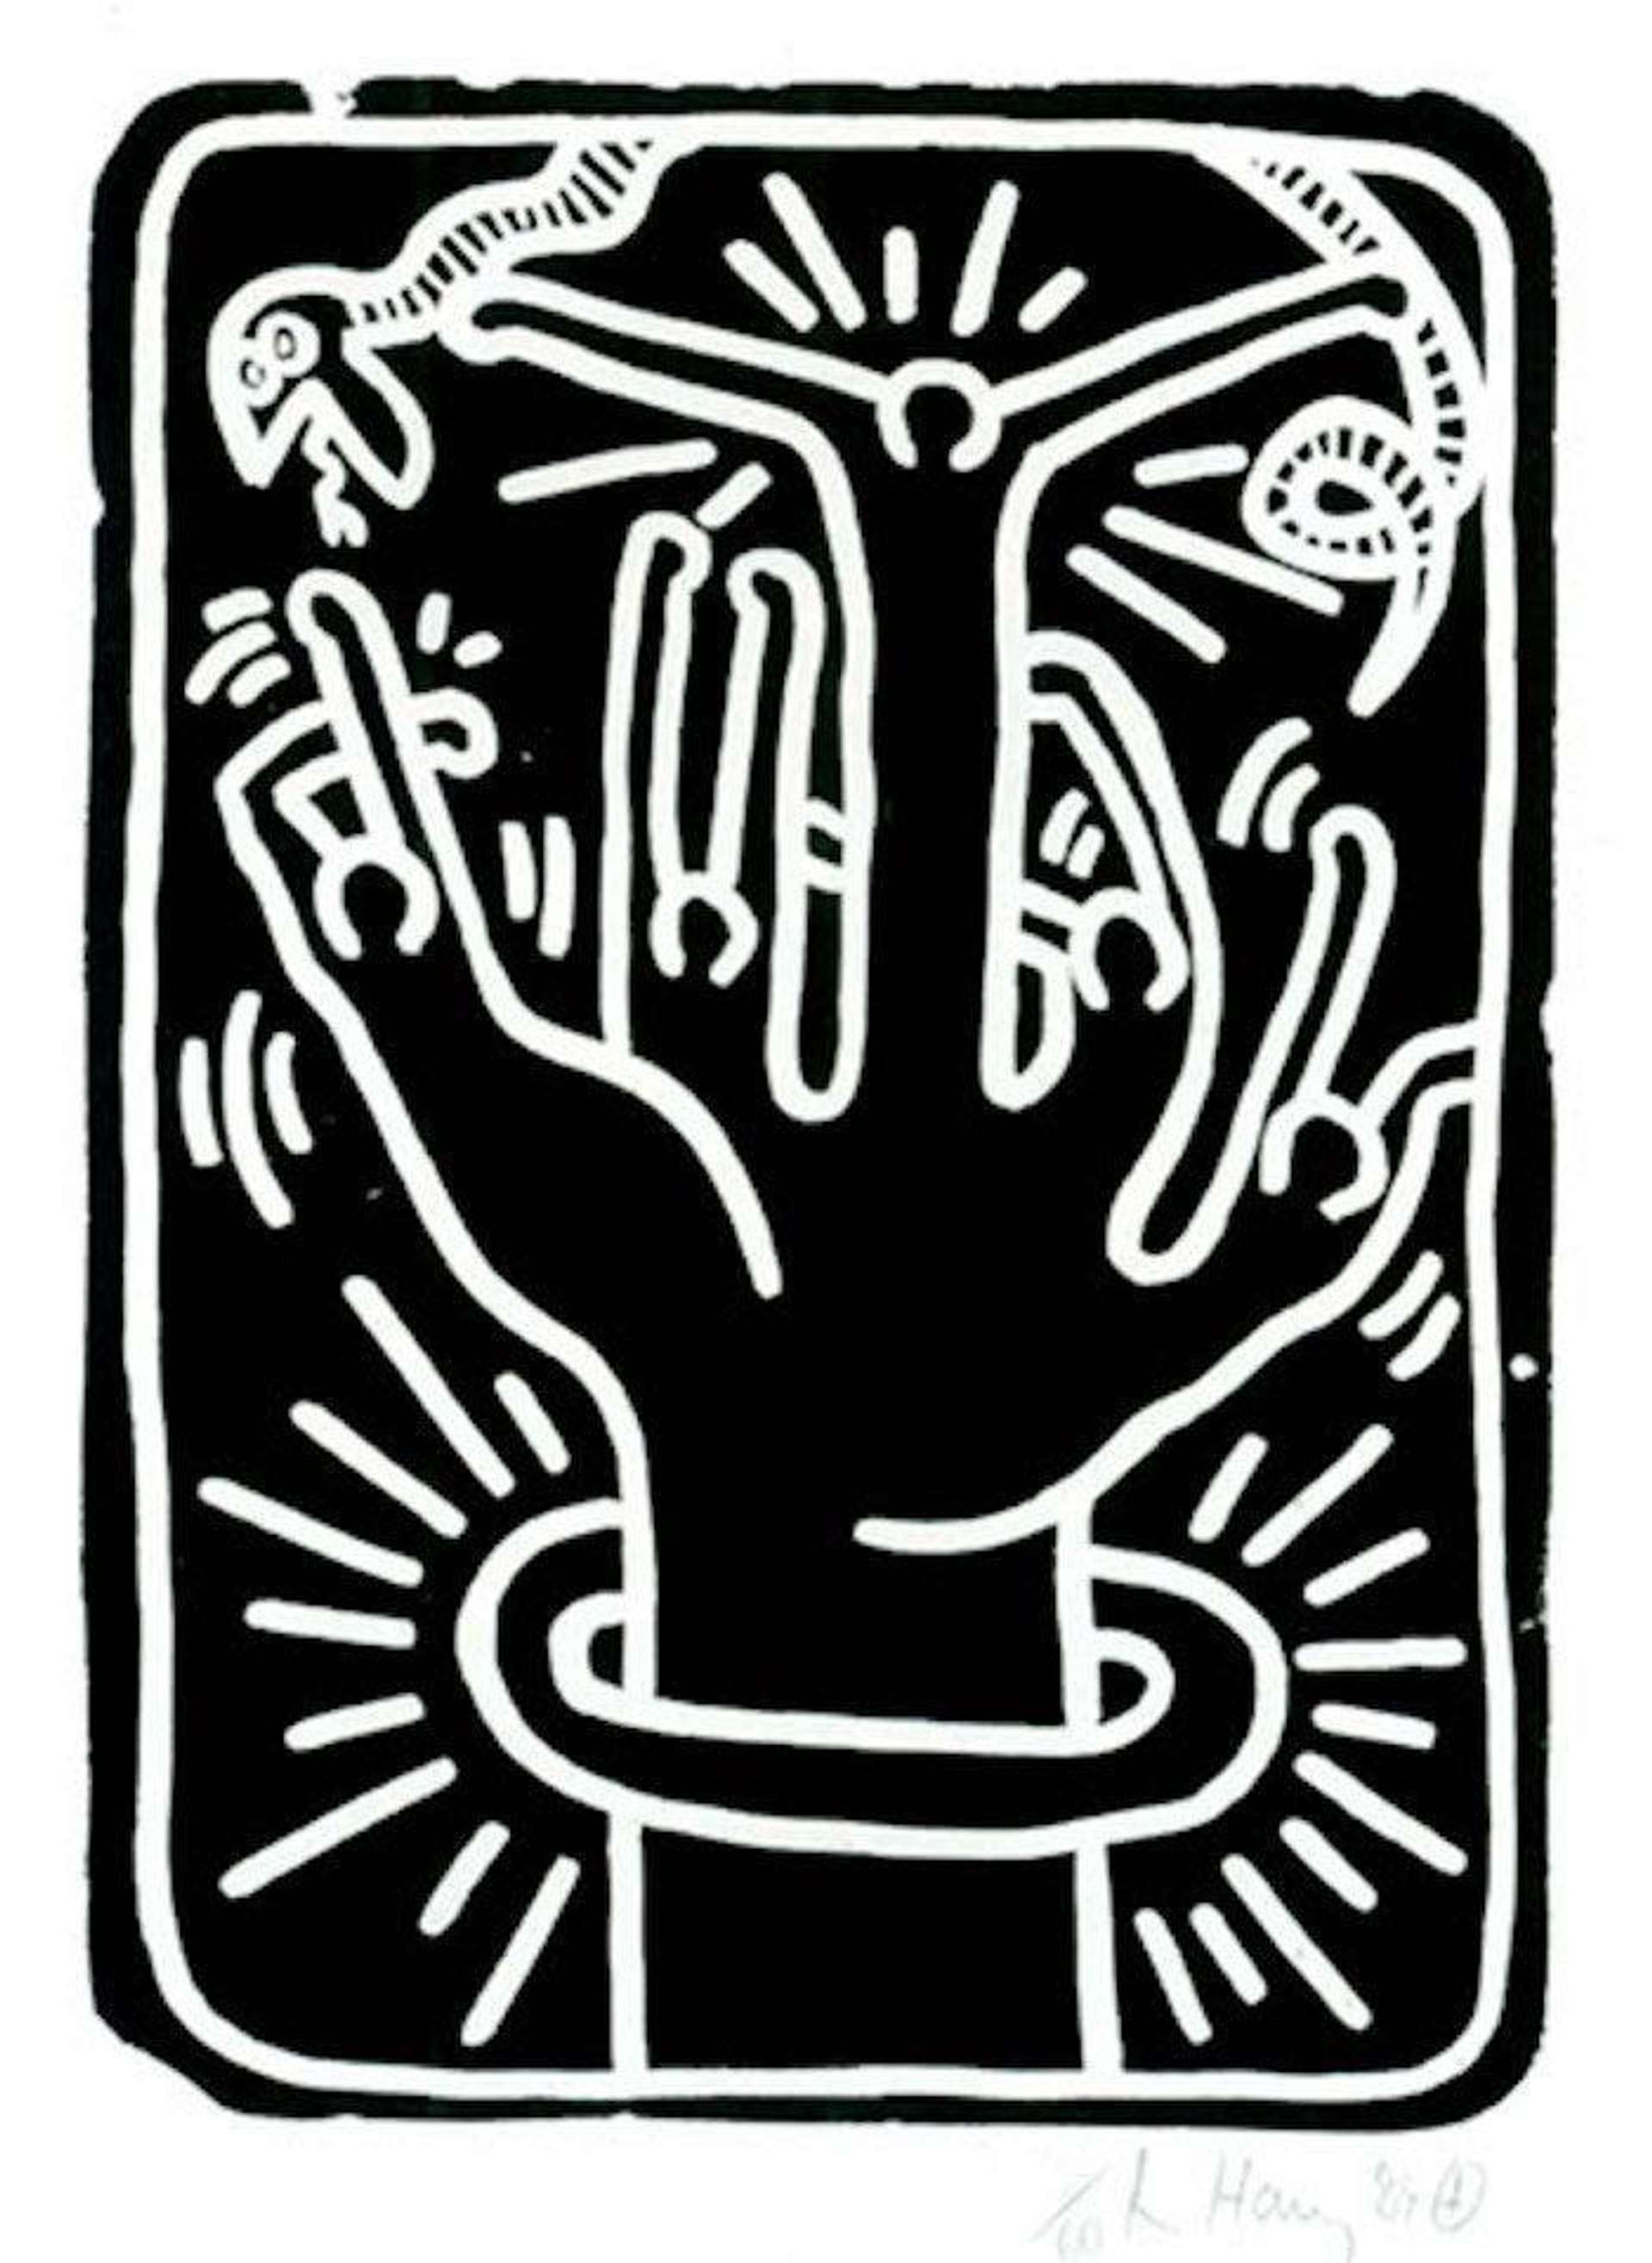 Keith Haring: Stones 2 - Signed Print